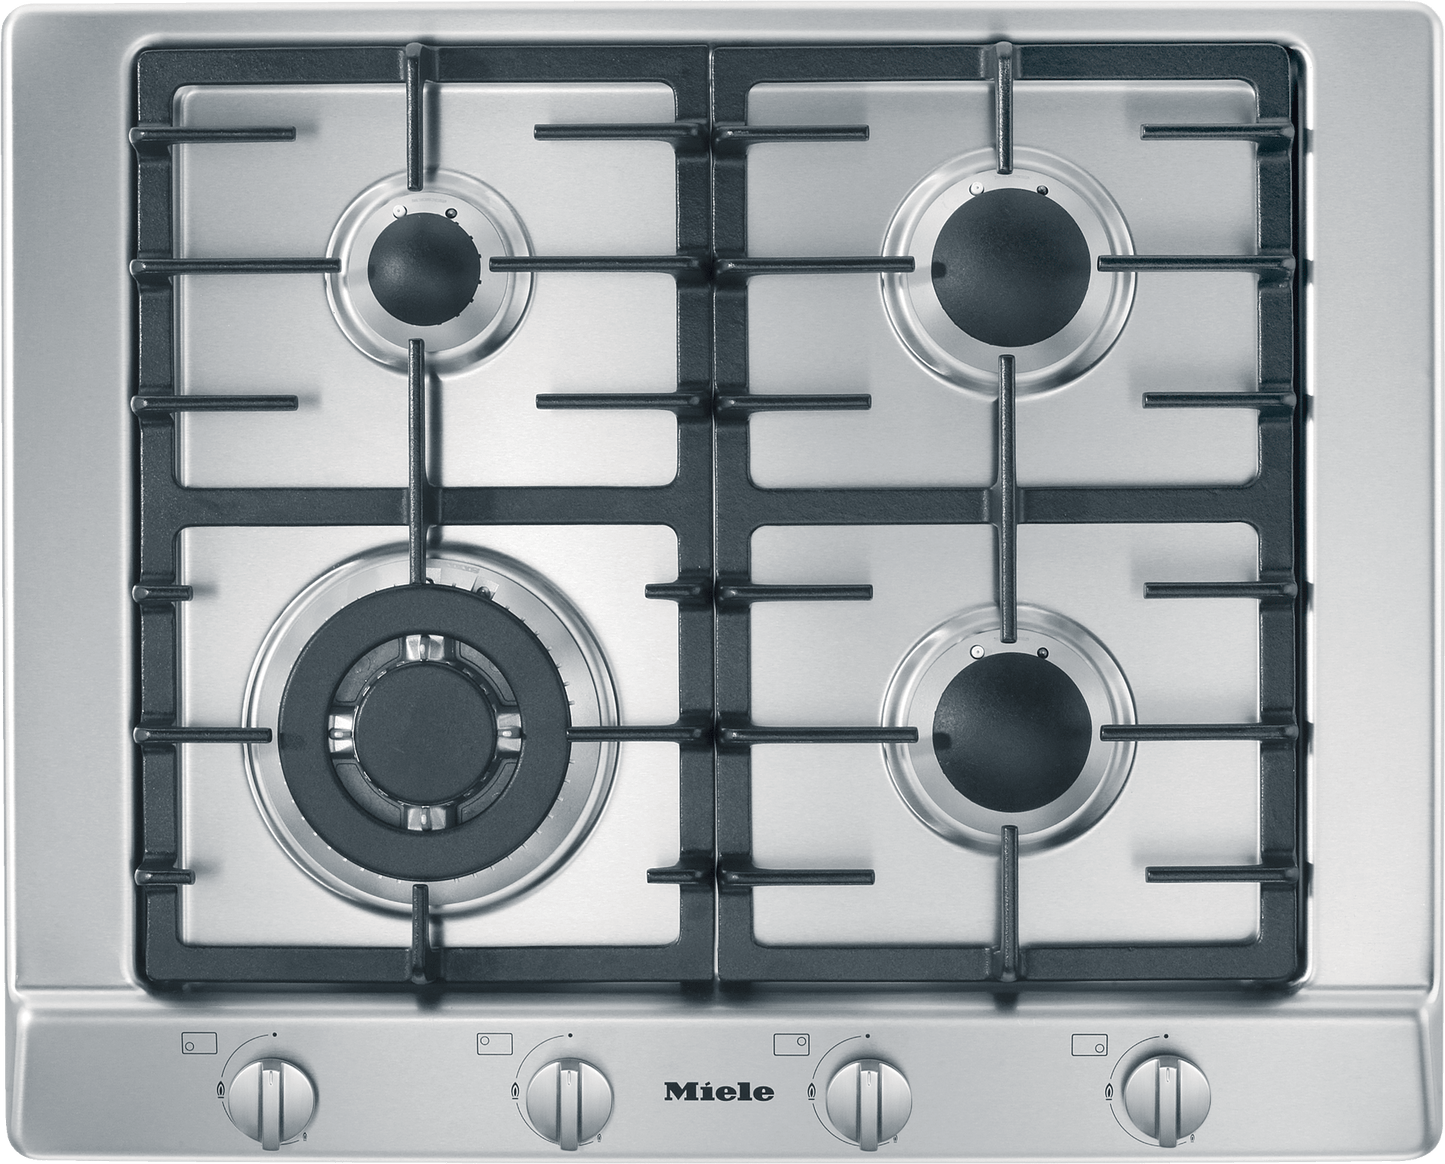 Miele KM2012GSTAINLESSSTEEL Km 2012 G - Gas Cooktop With A Mono Wok Burner For Special Applications.